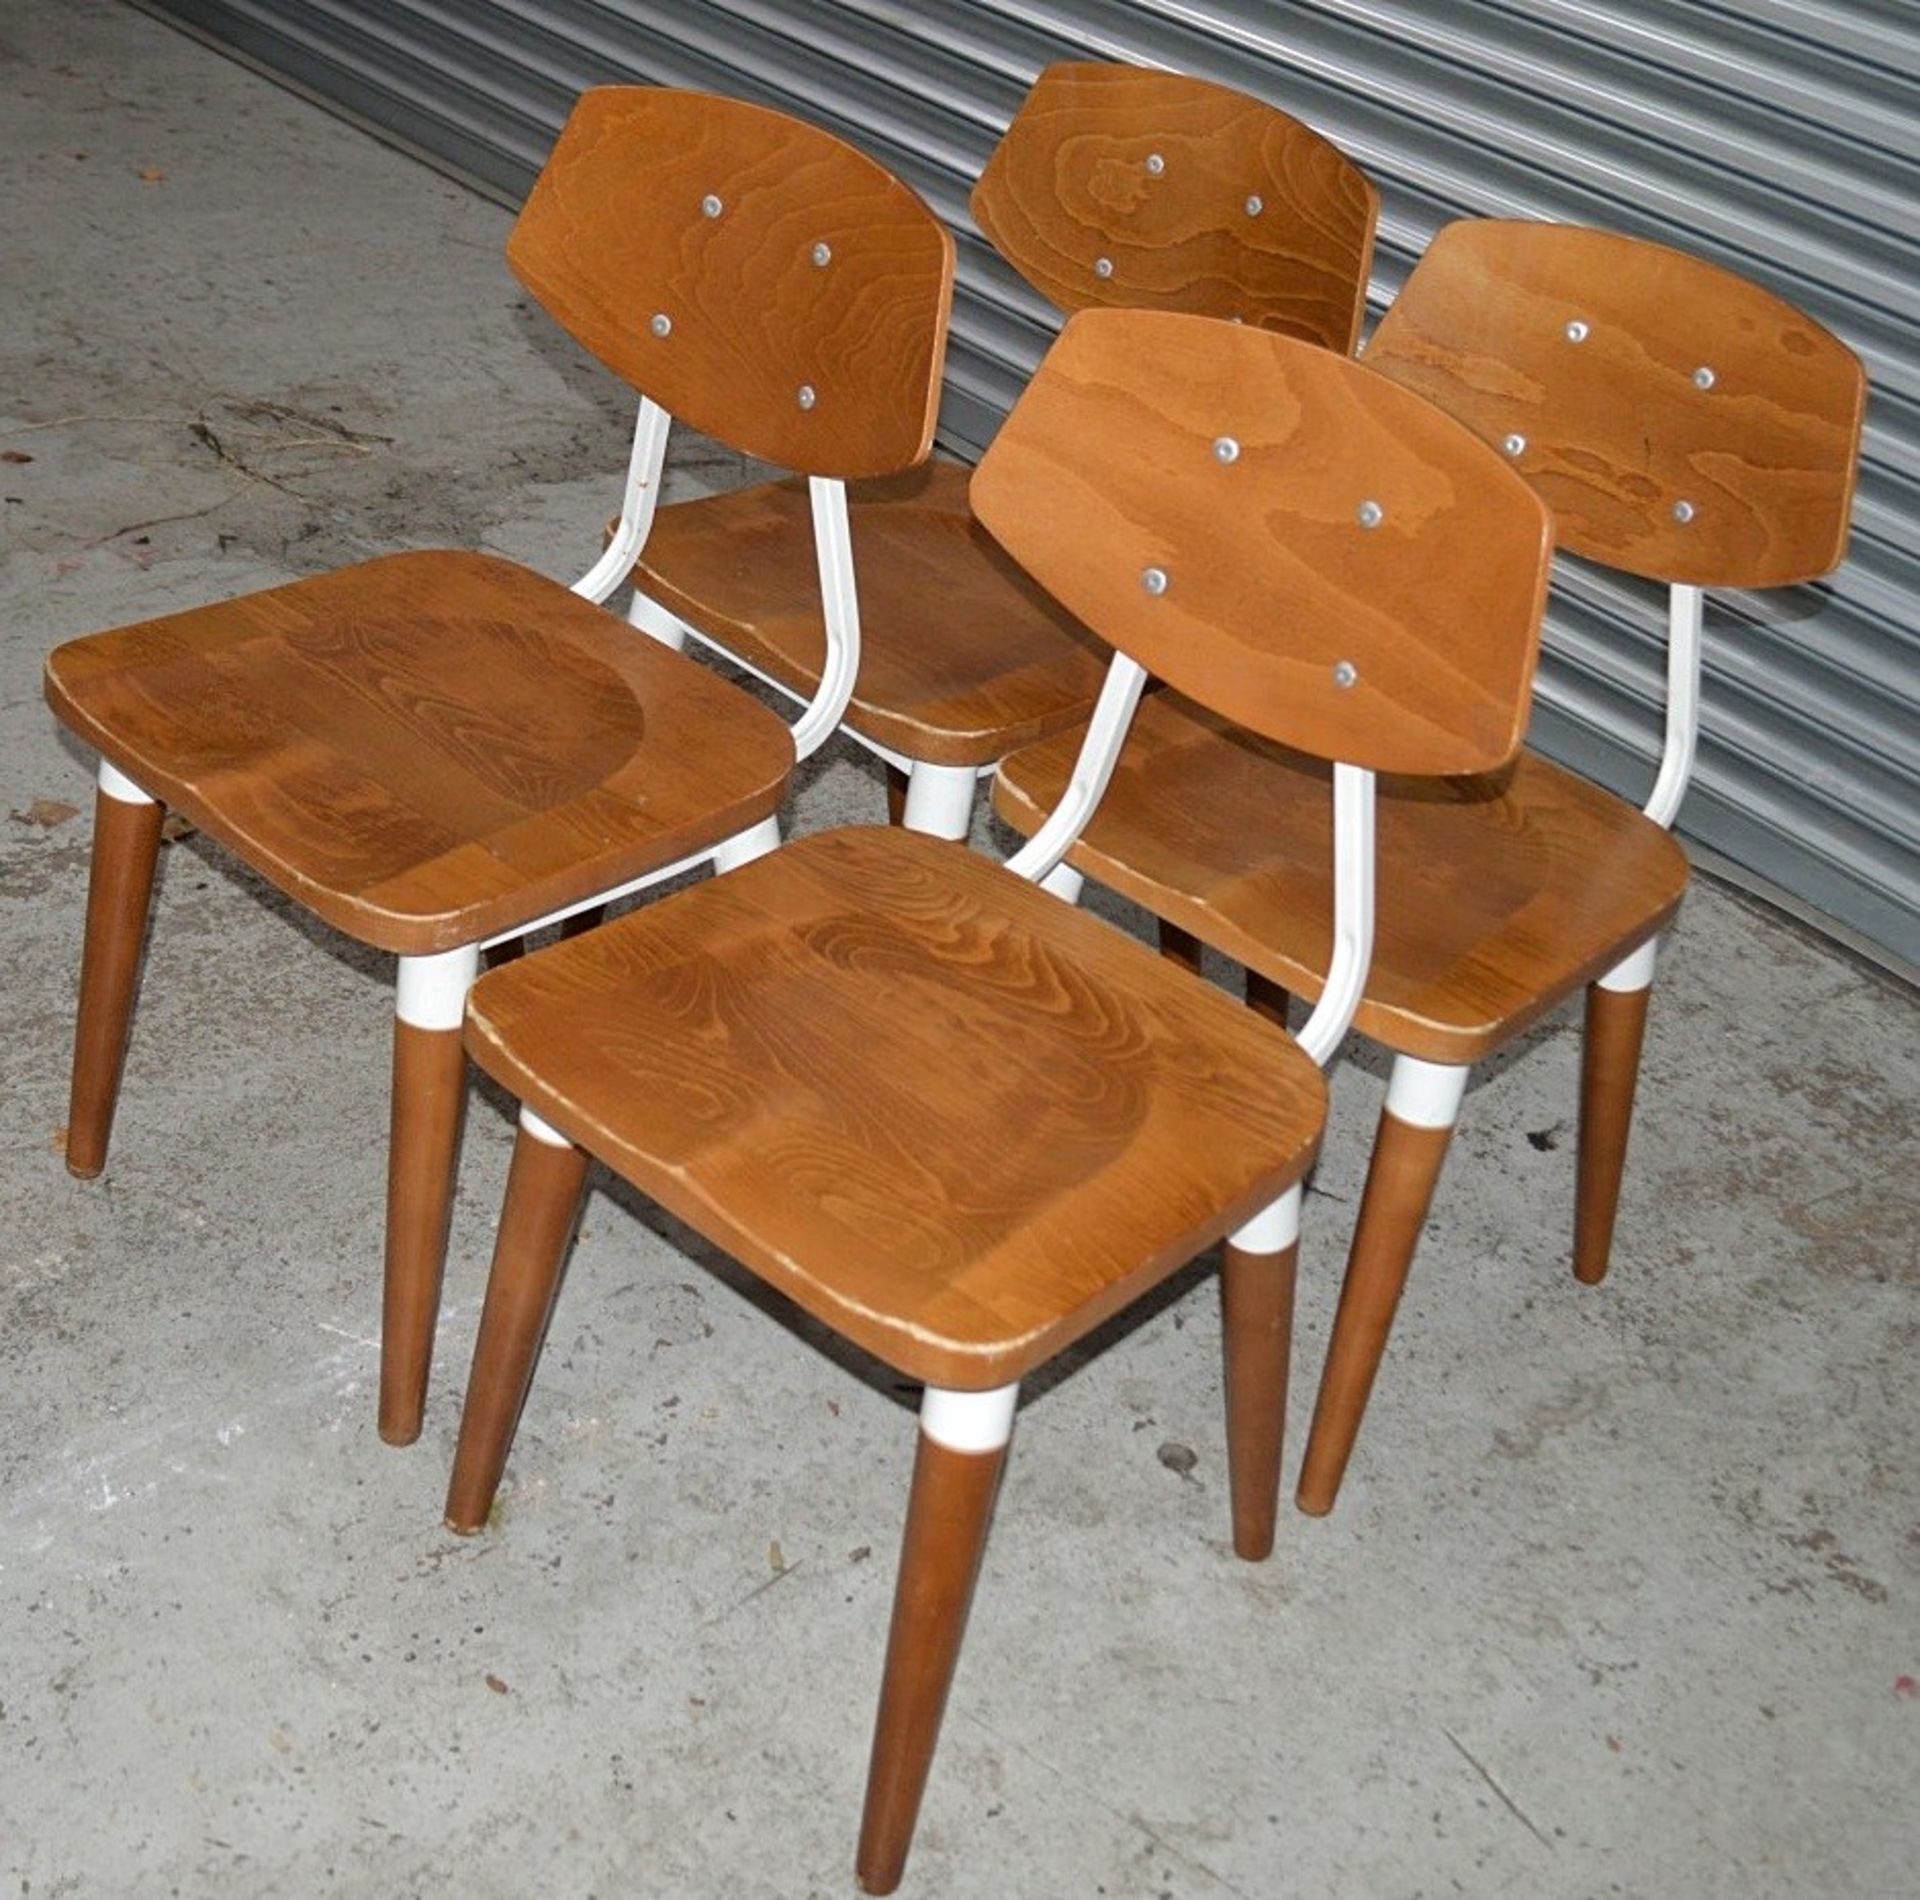 8 x Contemporary Commercial Dining Chairs With A Sturdy Wood And Metal Construction - Image 6 of 10